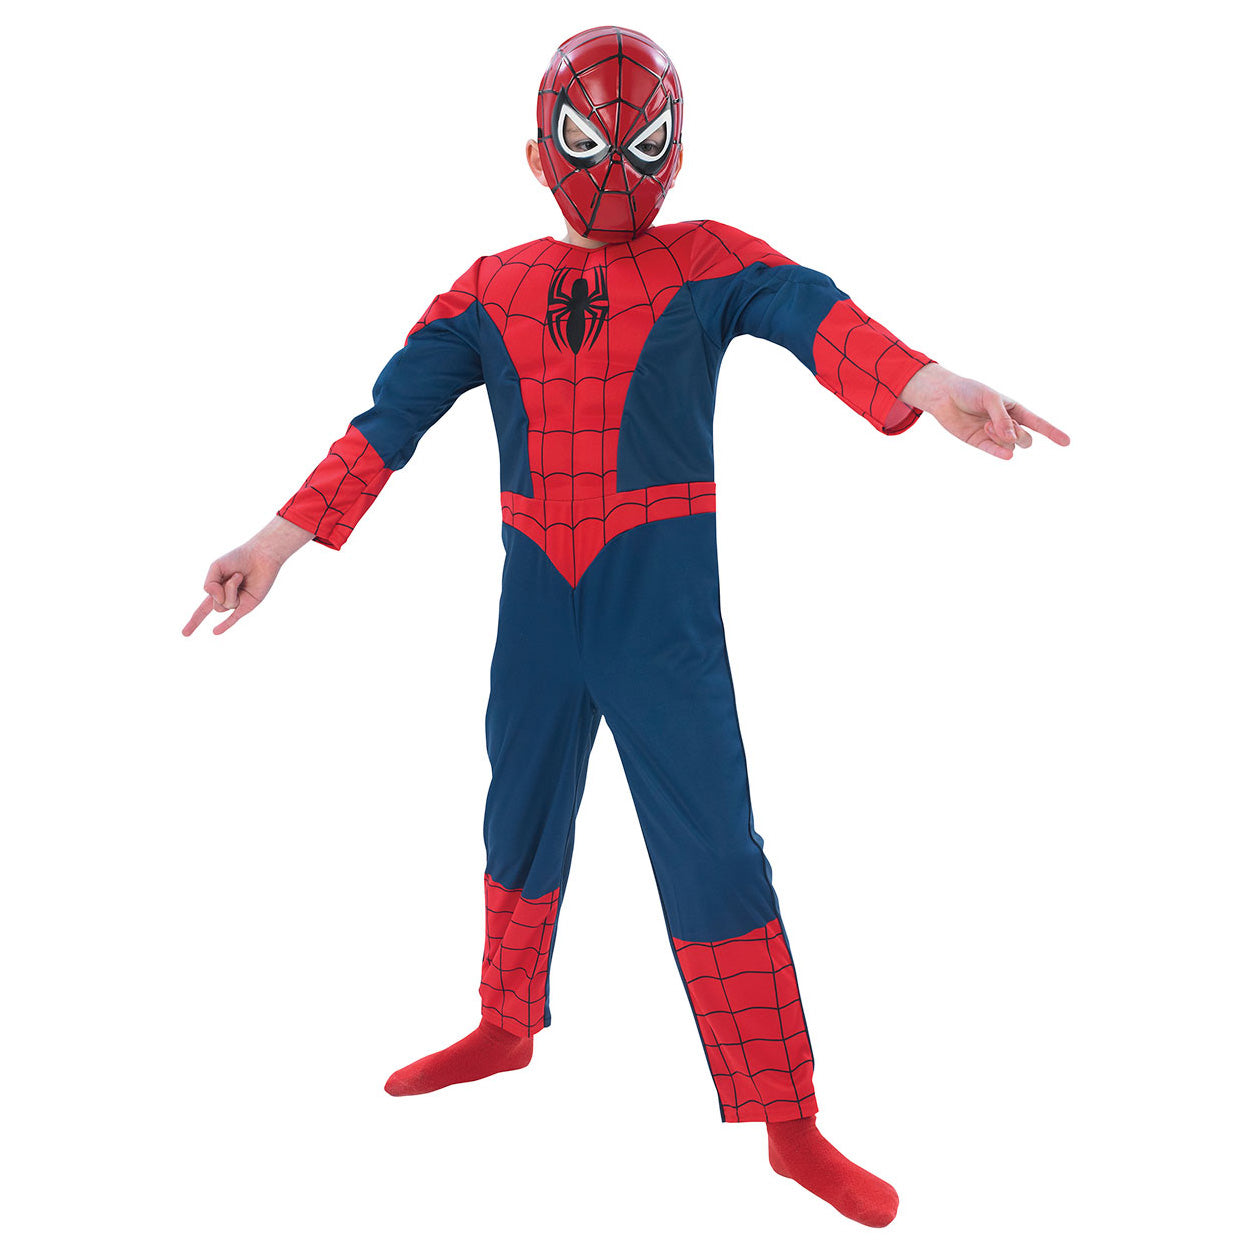 Spider-Man Birthday Party Ideas - Party Centre